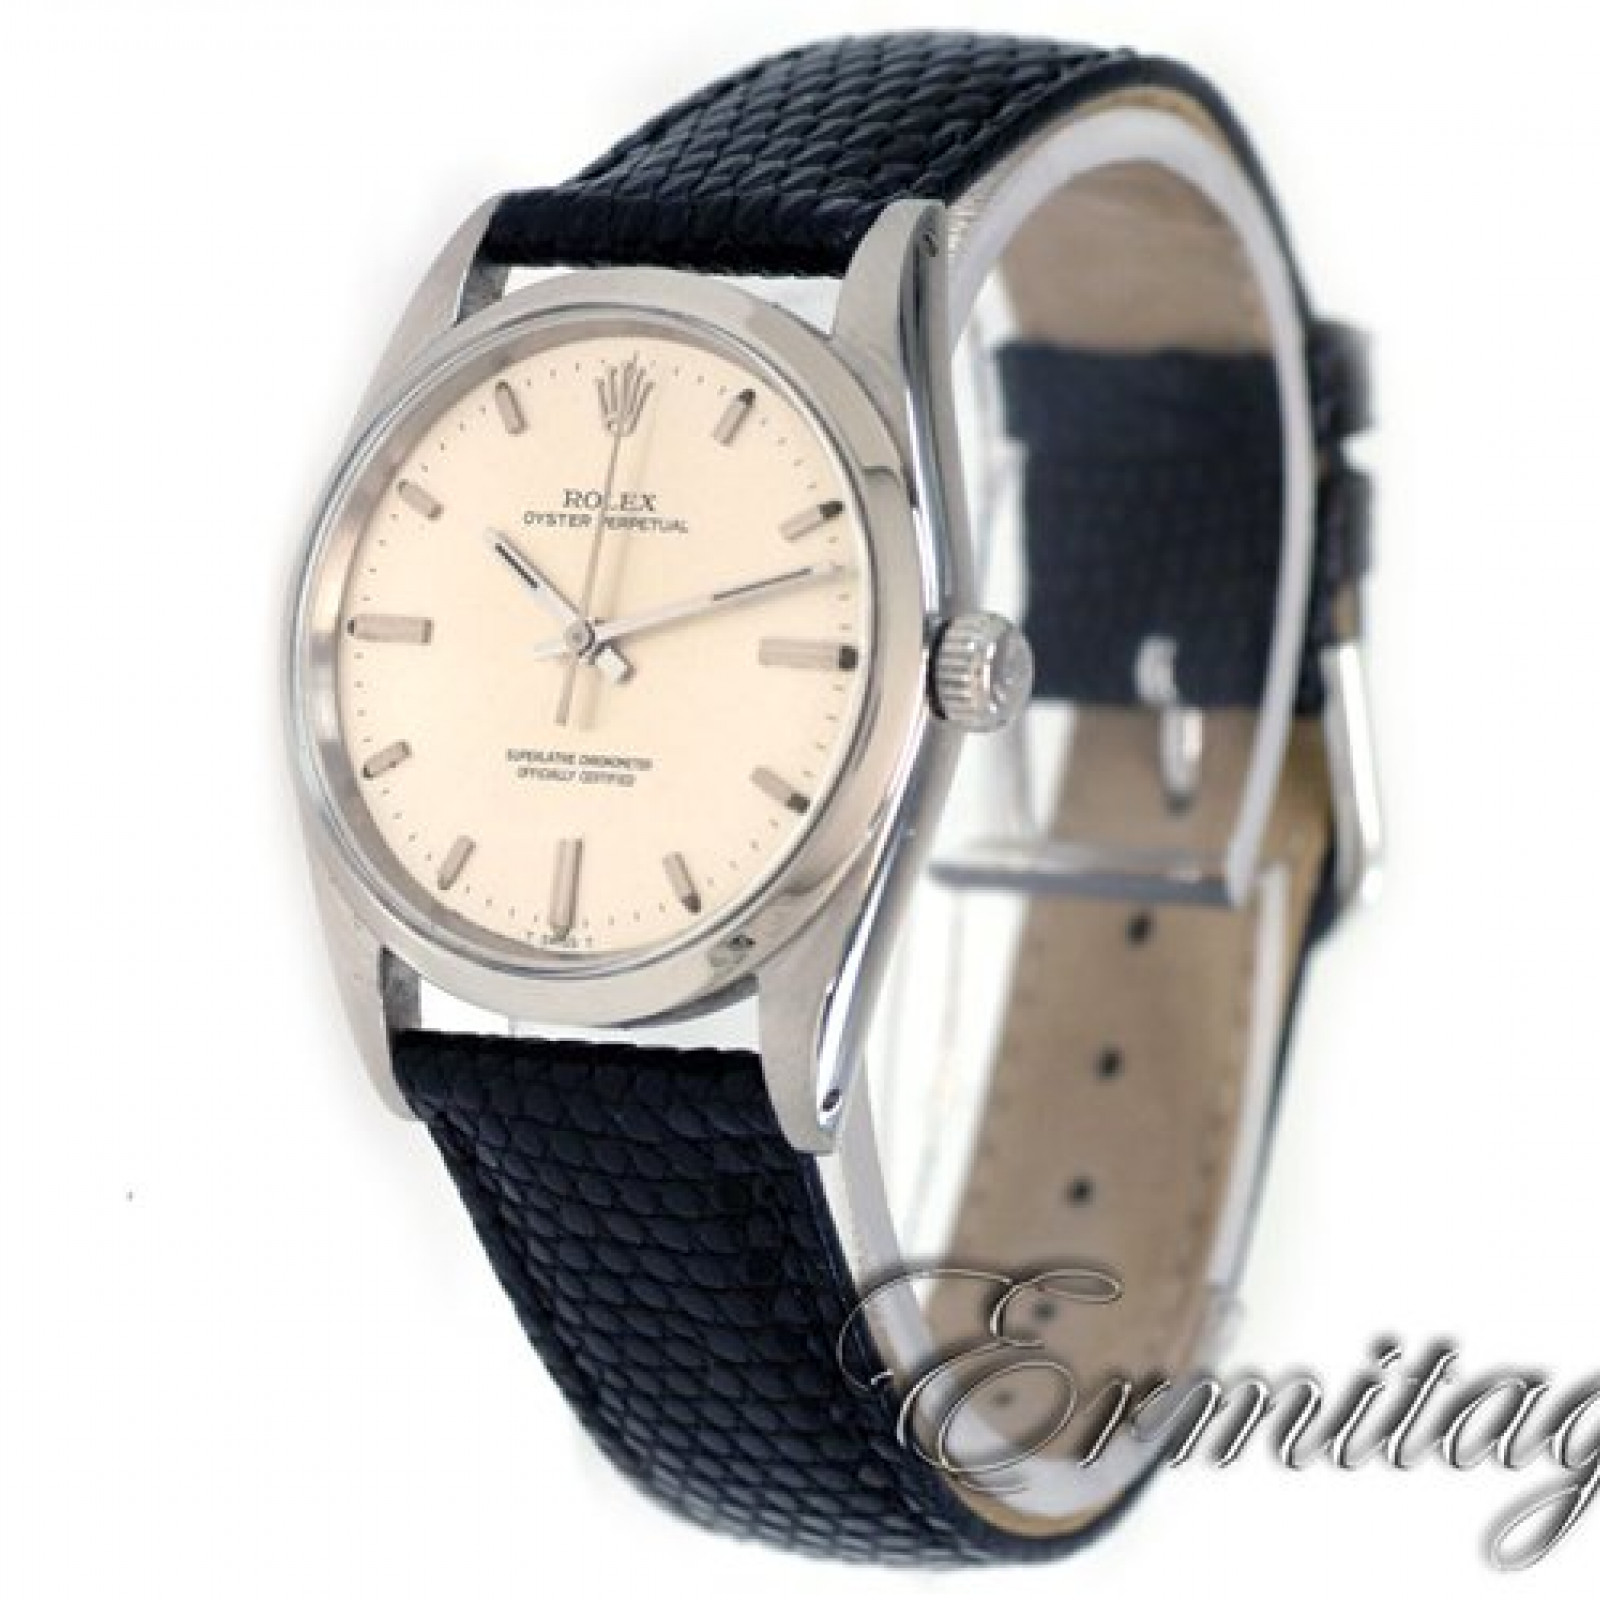 Vintage Rolex Oyster Perpetual 1018 Steel with Silver Dial